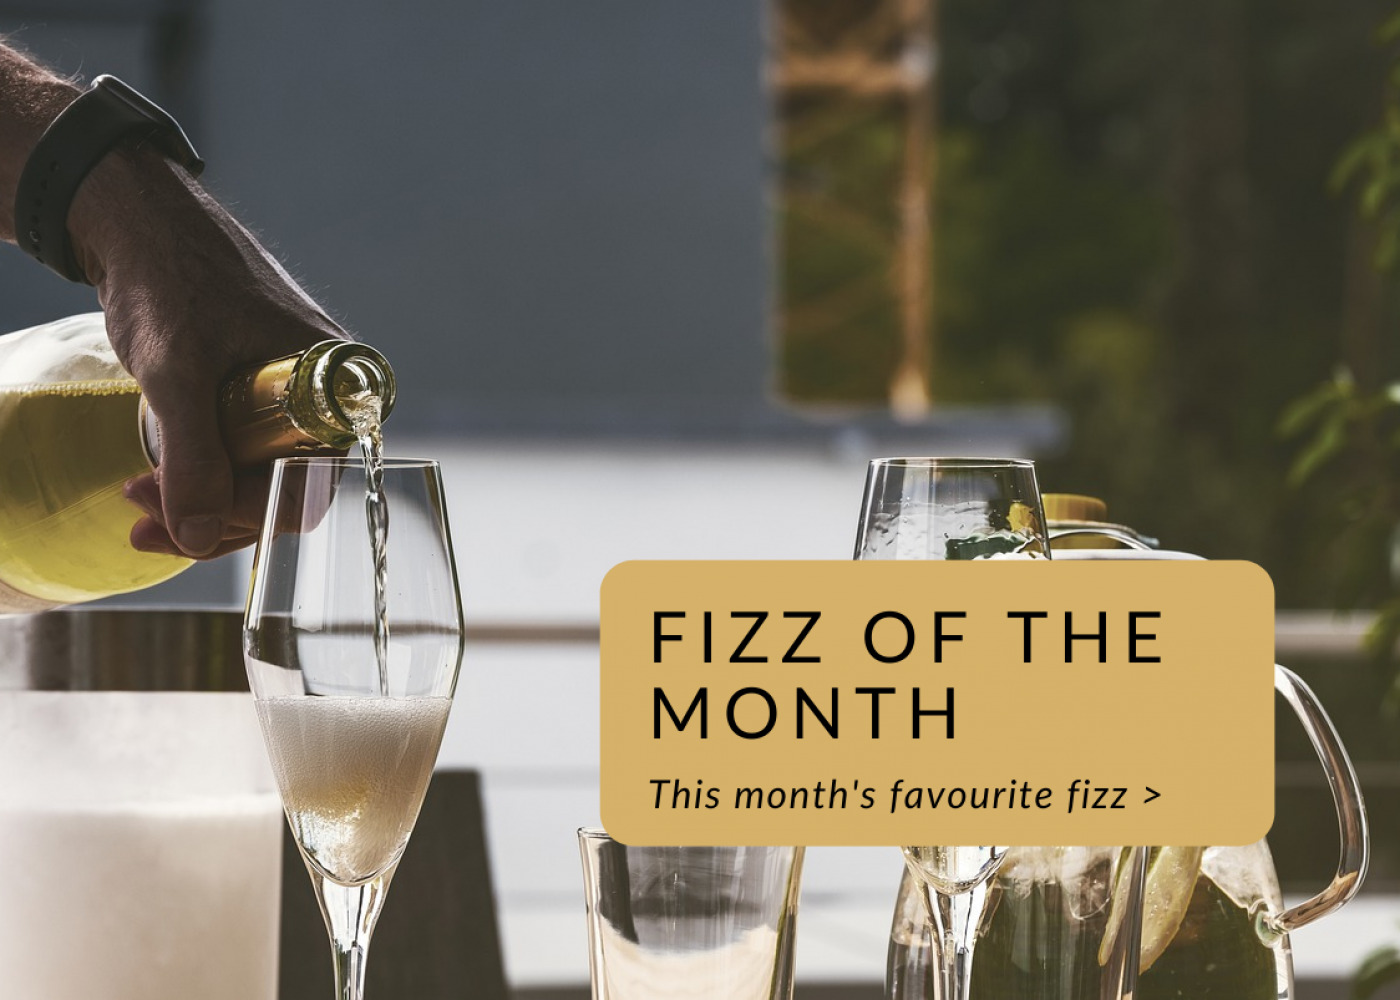 Fizz of the month (7)